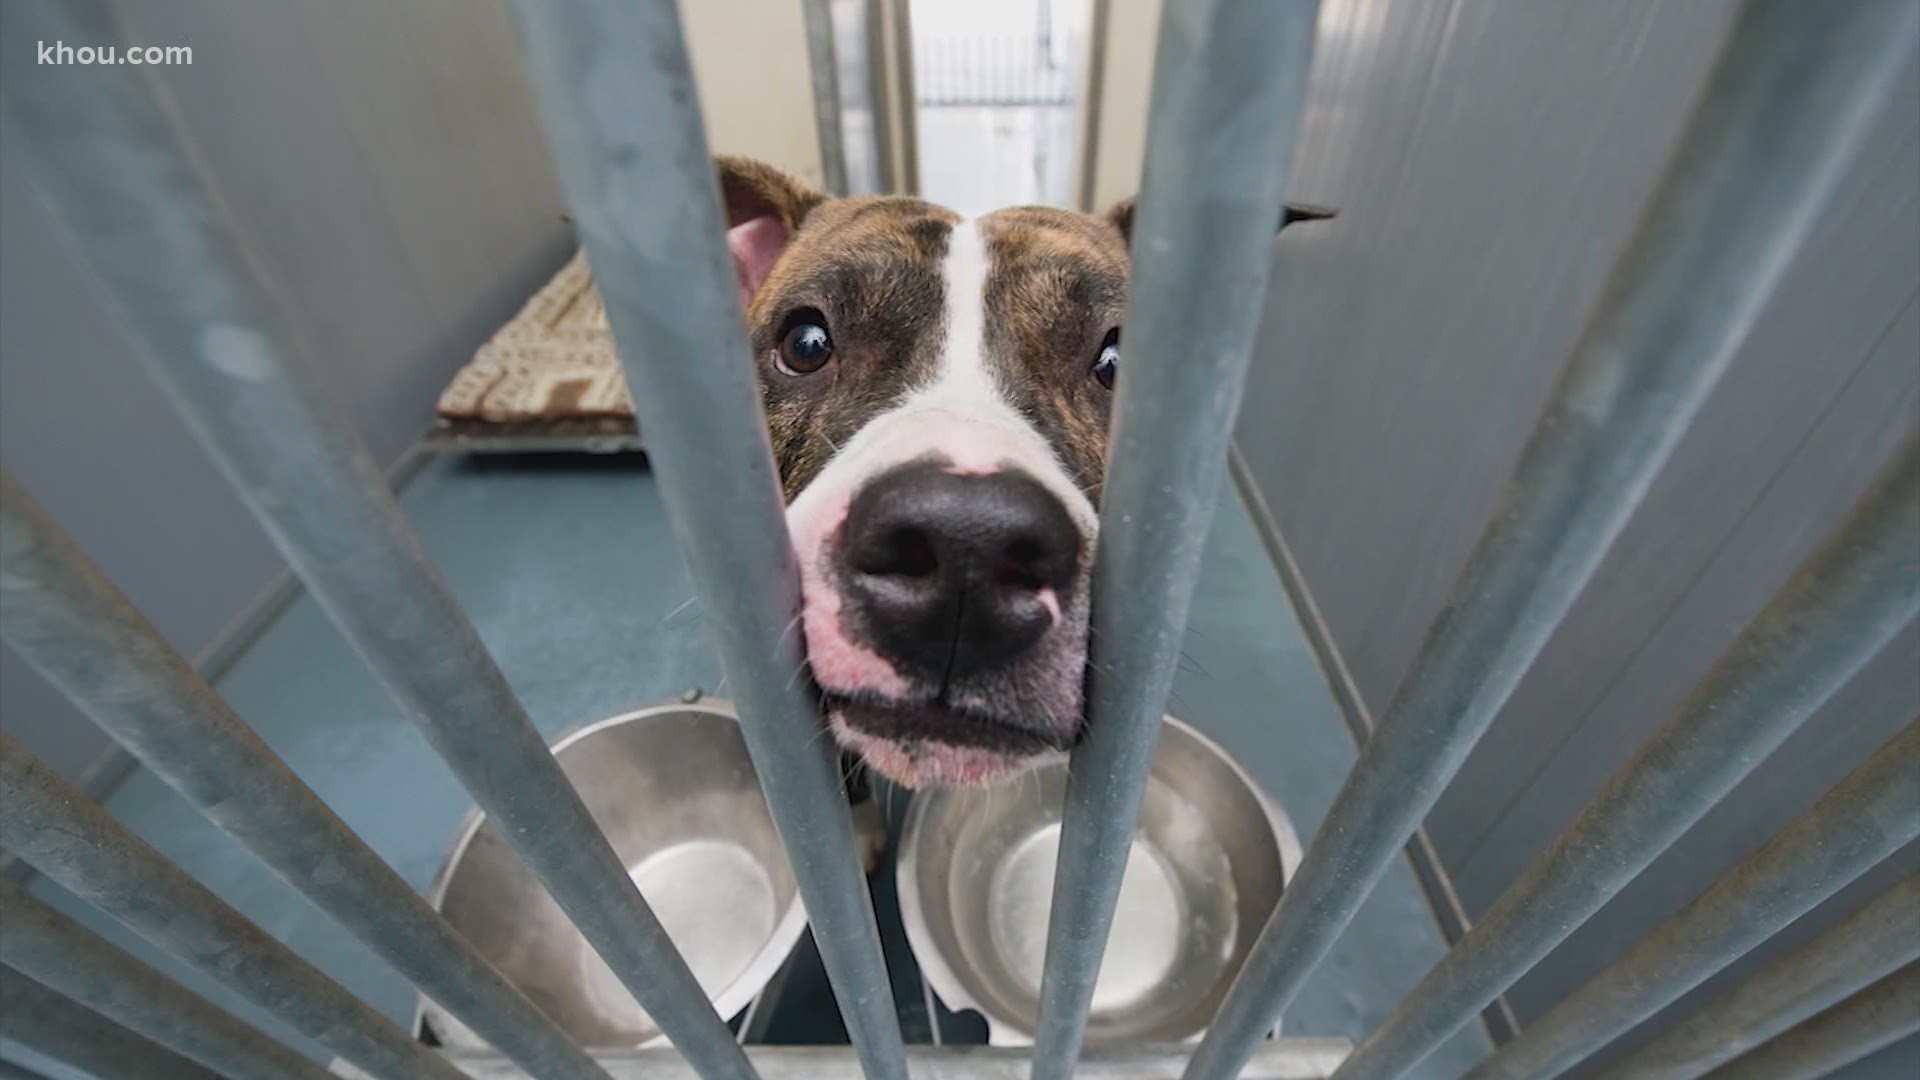 Houston animal shelters still have hundreds of animals that need homes. They're also seeing an increase in pet owners that need financial help.